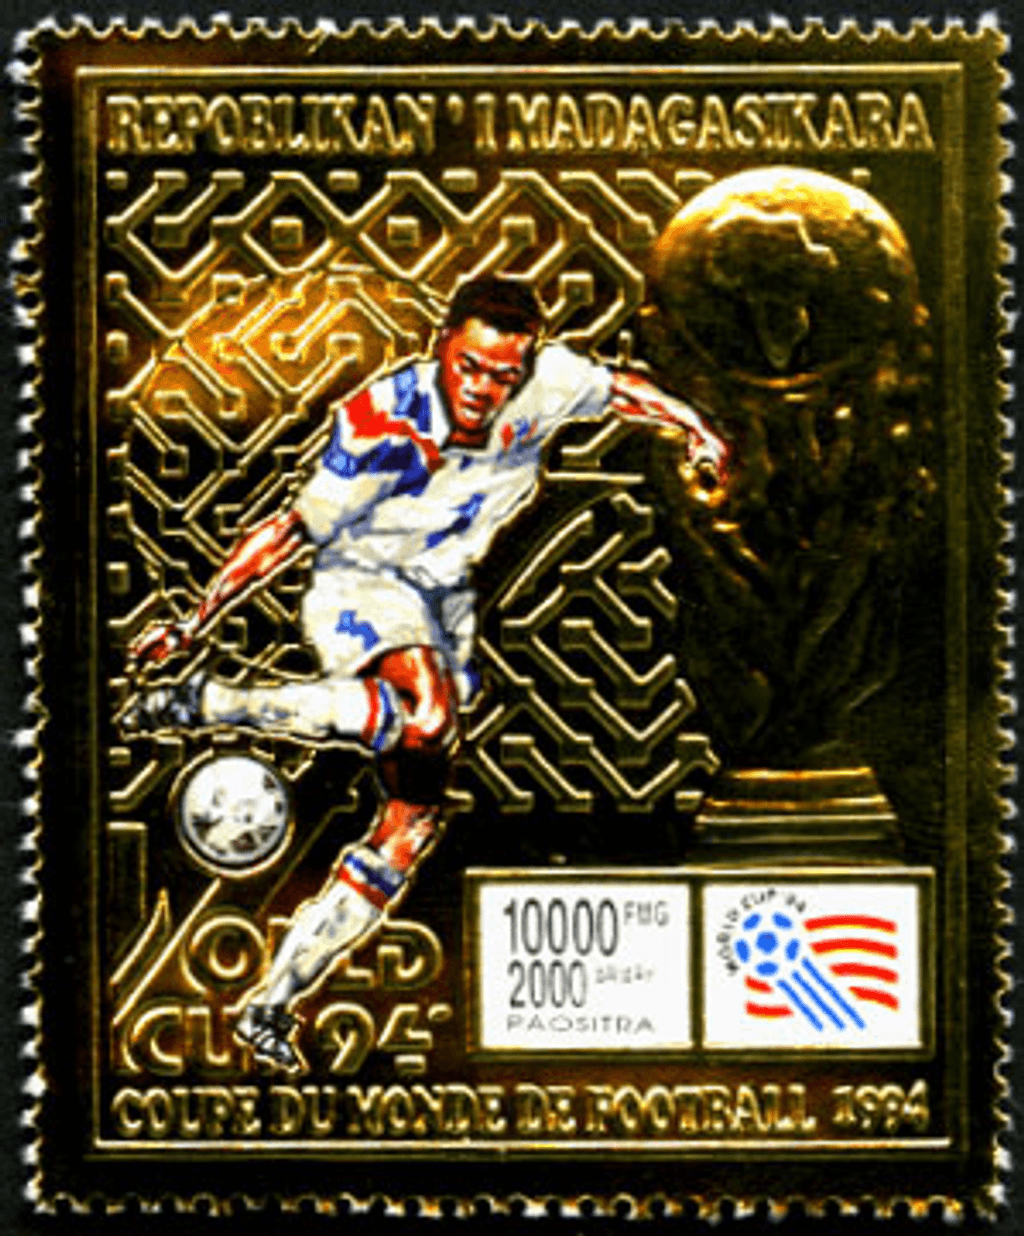 Football Worldcup 94 / Gold